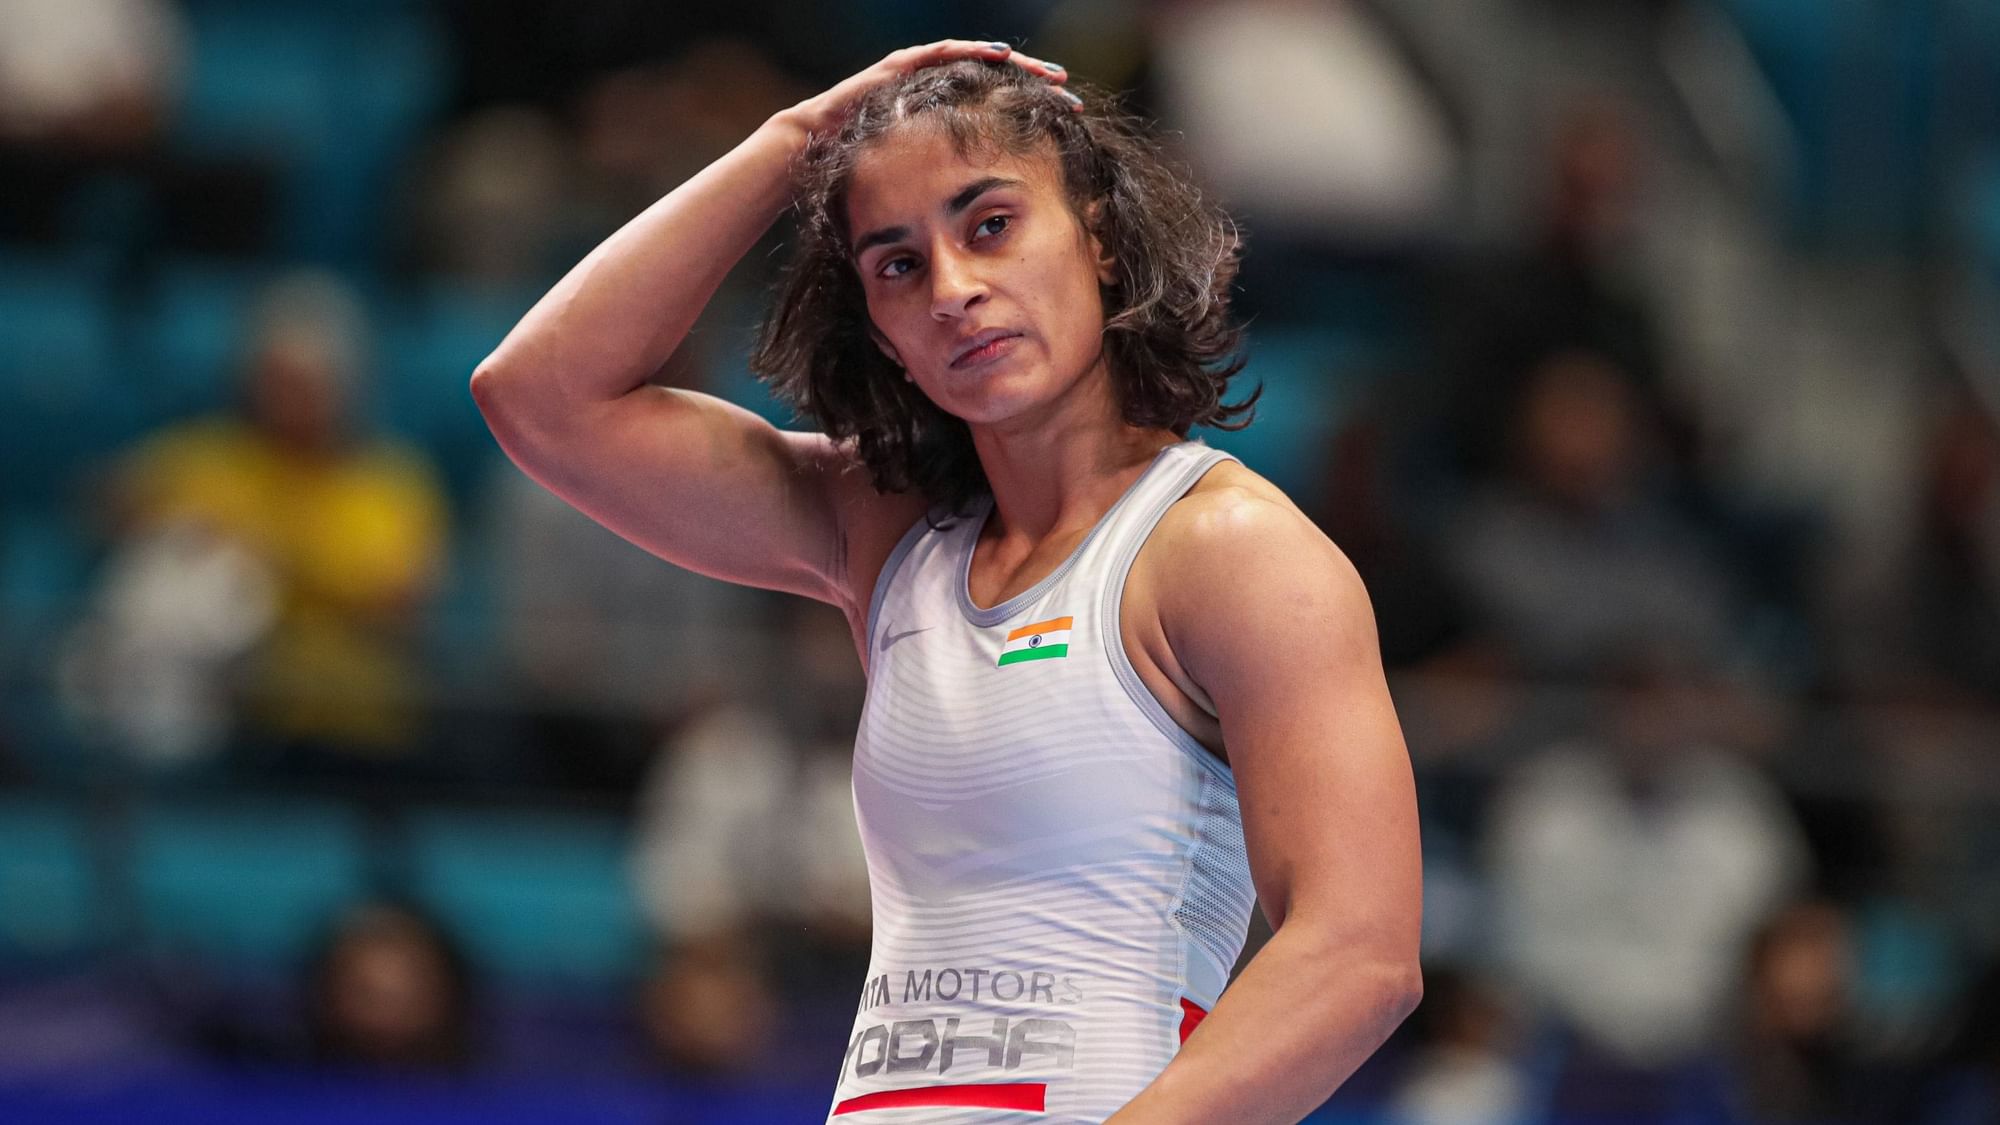 World Wrestling Championships 2019 Live Updates: Vinesh Phogat will be fighting in the repechage round at the World Wrestling Championships today.